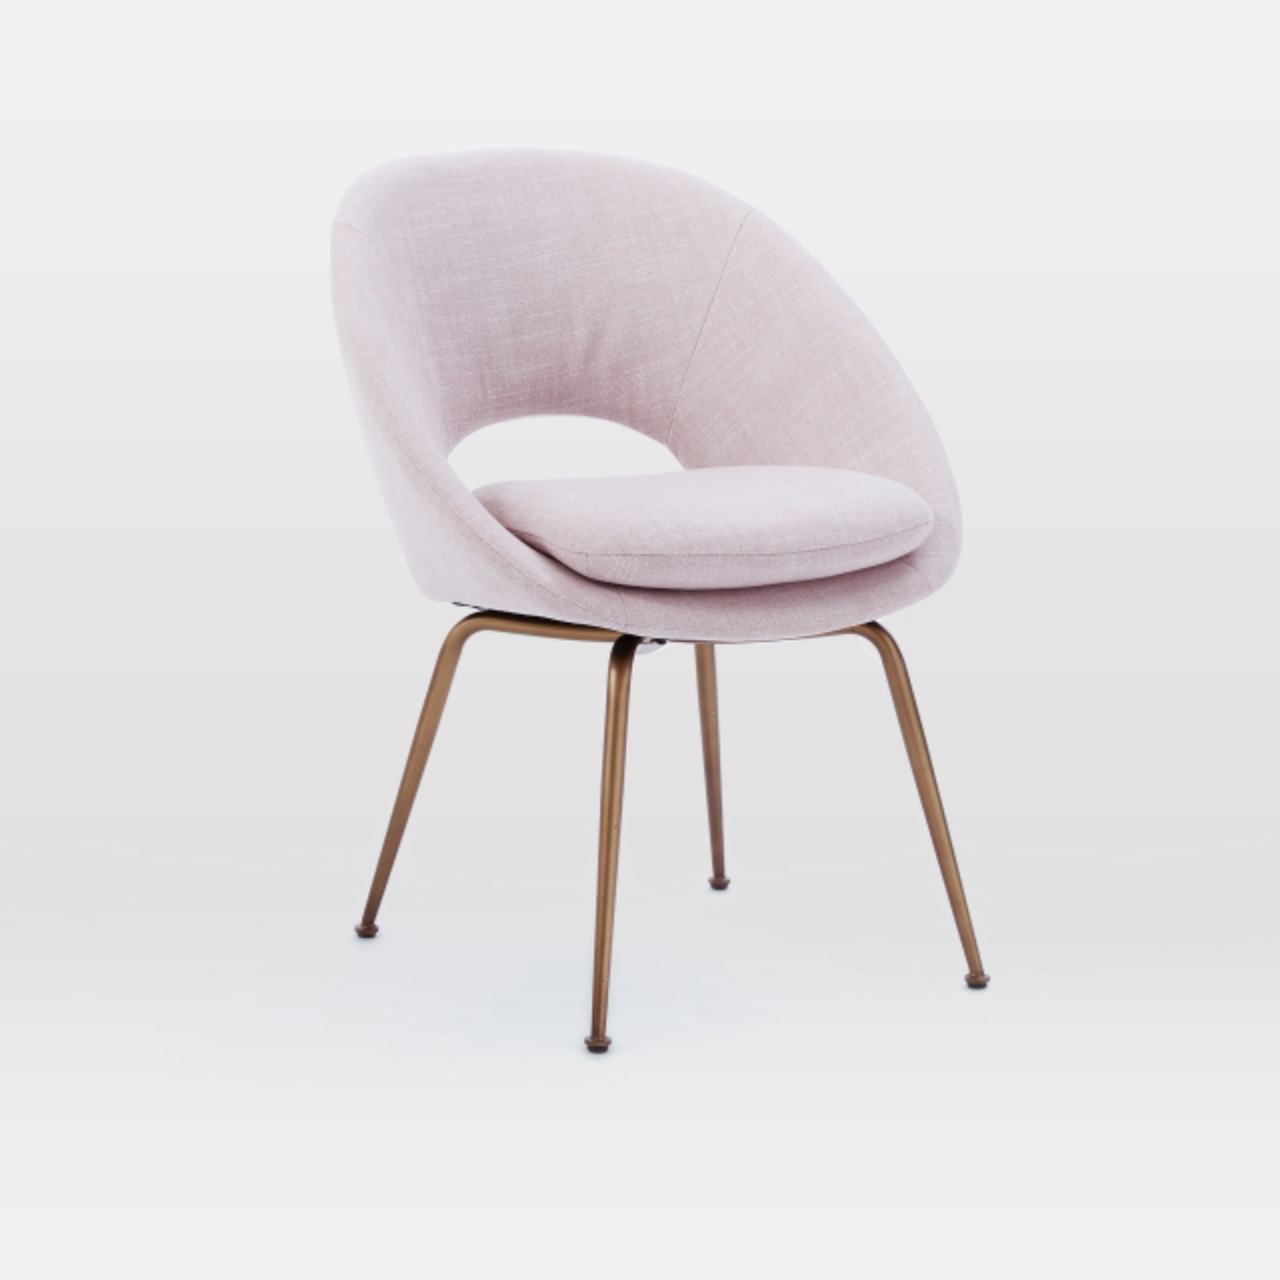 West Elm’s Orb upholstered dining chair comes in a Dusty Blush fabric ($249, westelm.com).<br>MUST CREDIT: West Elm